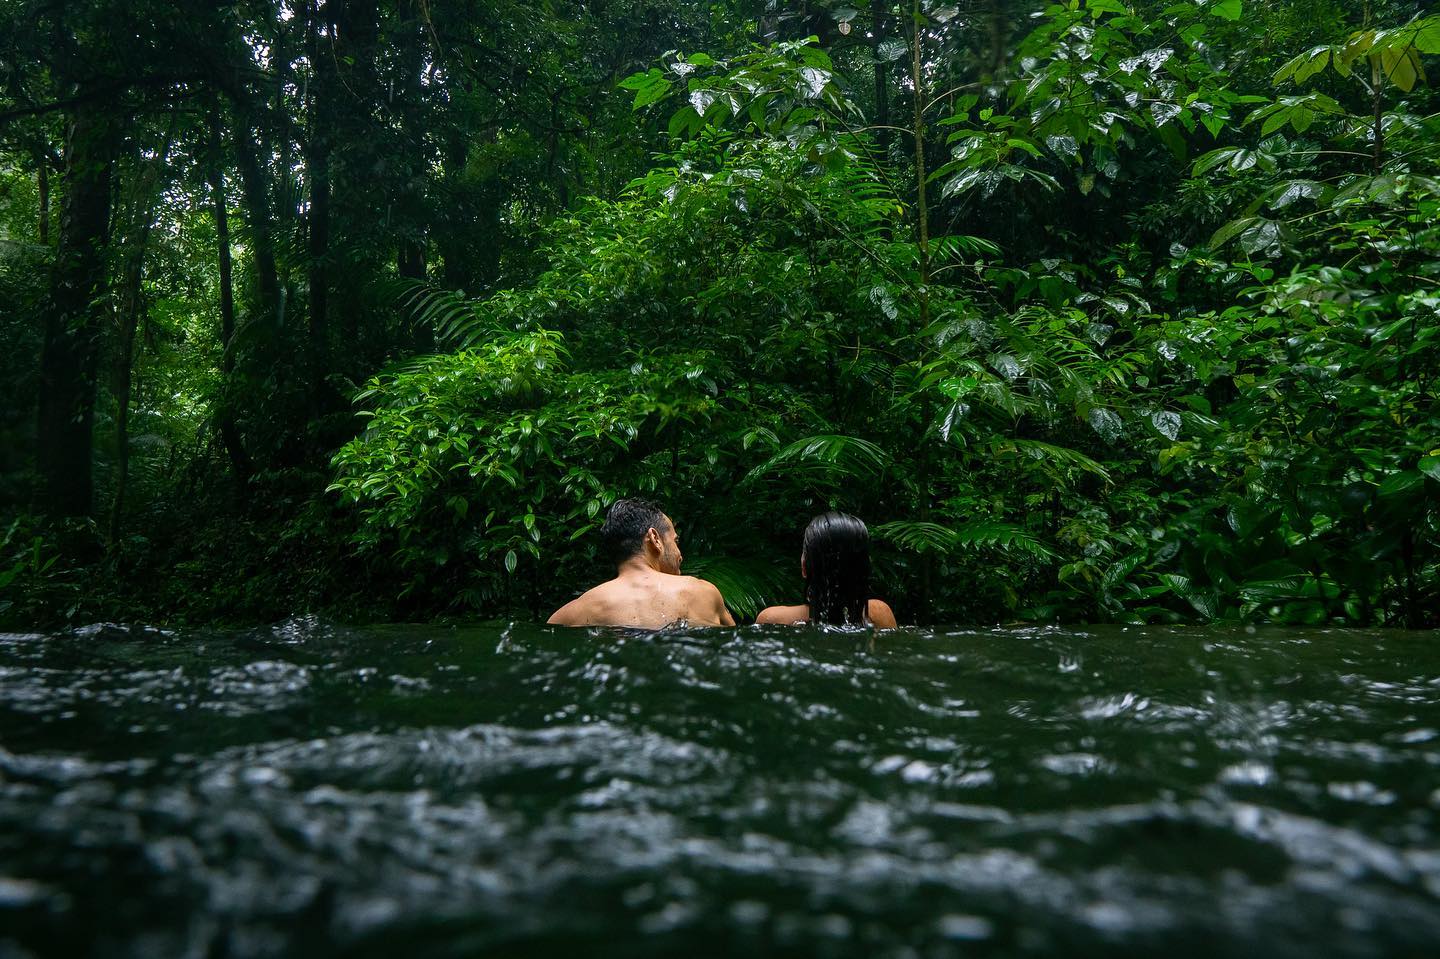 “To be completely submerged into the rainforest in Sensoria was a dream come true!”
.
Live a true rainforest experience! Visit sensoria.cr or reach out via WhatsApp +506 8955-4971.
.
#experiencesensoria
.
#travel #costarica #nature #leisure #explore #tourism #visitcostarica #luxury #hotsprings #rainforest